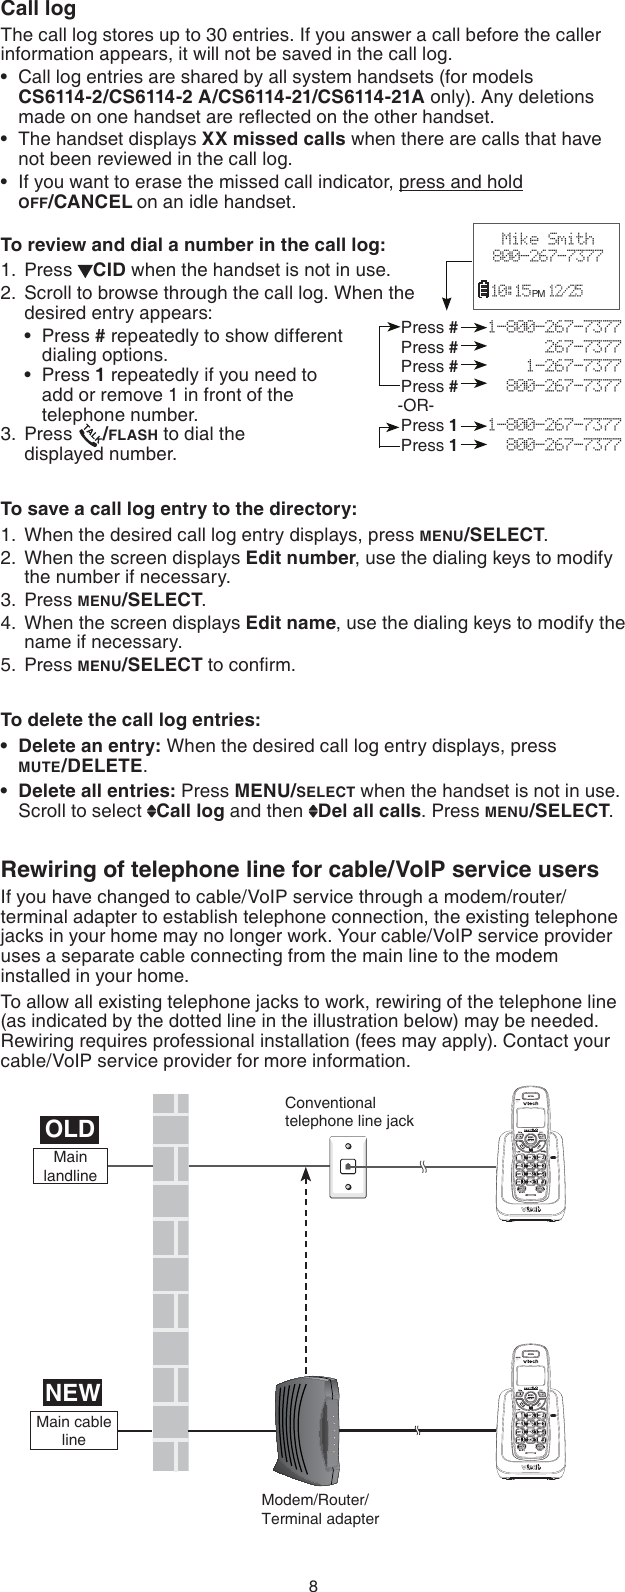 8Call logThe call log stores up to 30 entries. If you answer a call before the caller information appears, it will not be saved in the call log.Call log entries are shared by all system handsets (for models  CS6114-2/CS6114-2 A/CS6114-21/CS6114-21A only). Any deletions made on one handset are reﬂected on the other handset.The handset displays XX missed calls when there are calls that have  not been reviewed in the call log.If you want to erase the missed call indicator, press and hold  OFF/CANCEL on an idle handset.To review and dial a number in the call log:Press  CID when the handset is not in use.Scroll to browse through the call log. When the desired entry appears:Press # repeatedly to show different dialing options.Press 1 repeatedly if you need to  add or remove 1 in front of the   telephone number.Press  /FLASH to dial the    displayed number.To save a call log entry to the directory:When the desired call log entry displays, press MENU/SELECT.When the screen displays Edit number, use the dialing keys to modify the number if necessary.Press MENU/SELECT.When the screen displays Edit name, use the dialing keys to modify the name if necessary.Press MENU/SELECT to conﬁrm.To delete the call log entries:Delete an entry: When the desired call log entry displays, press  MUTE/DELETE.Delete all entries: Press MENU/SELECT when the handset is not in use. Scroll to select  Call log and then  Del all calls. Press MENU/SELECT.Rewiring of telephone line for cable/VoIP service usersIf you have changed to cable/VoIP service through a modem/router/terminal adapter to establish telephone connection, the existing telephone jacks in your home may no longer work. Your cable/VoIP service provider uses a separate cable connecting from the main line to the modem installed in your home.To allow all existing telephone jacks to work, rewiring of the telephone line (as indicated by the dotted line in the illustration below) may be needed. Rewiring requires professional installation (fees may apply). Contact your cable/VoIP service provider for more information.•••1.2.••3.1.2.3.4.5.••Press #   1-800-267-7377Press #         267-7377Press #       1-267-7377Press #     800-267-7377-OR-Press 1   1-800-267-7377Press 1     800-267-7377Mike Smith800-267-7377  10:15 PM  12/25 NEWOLDConventional telephone line jackModem/Router/Terminal adapterMain cable lineMain landlineCANCELCANCEL